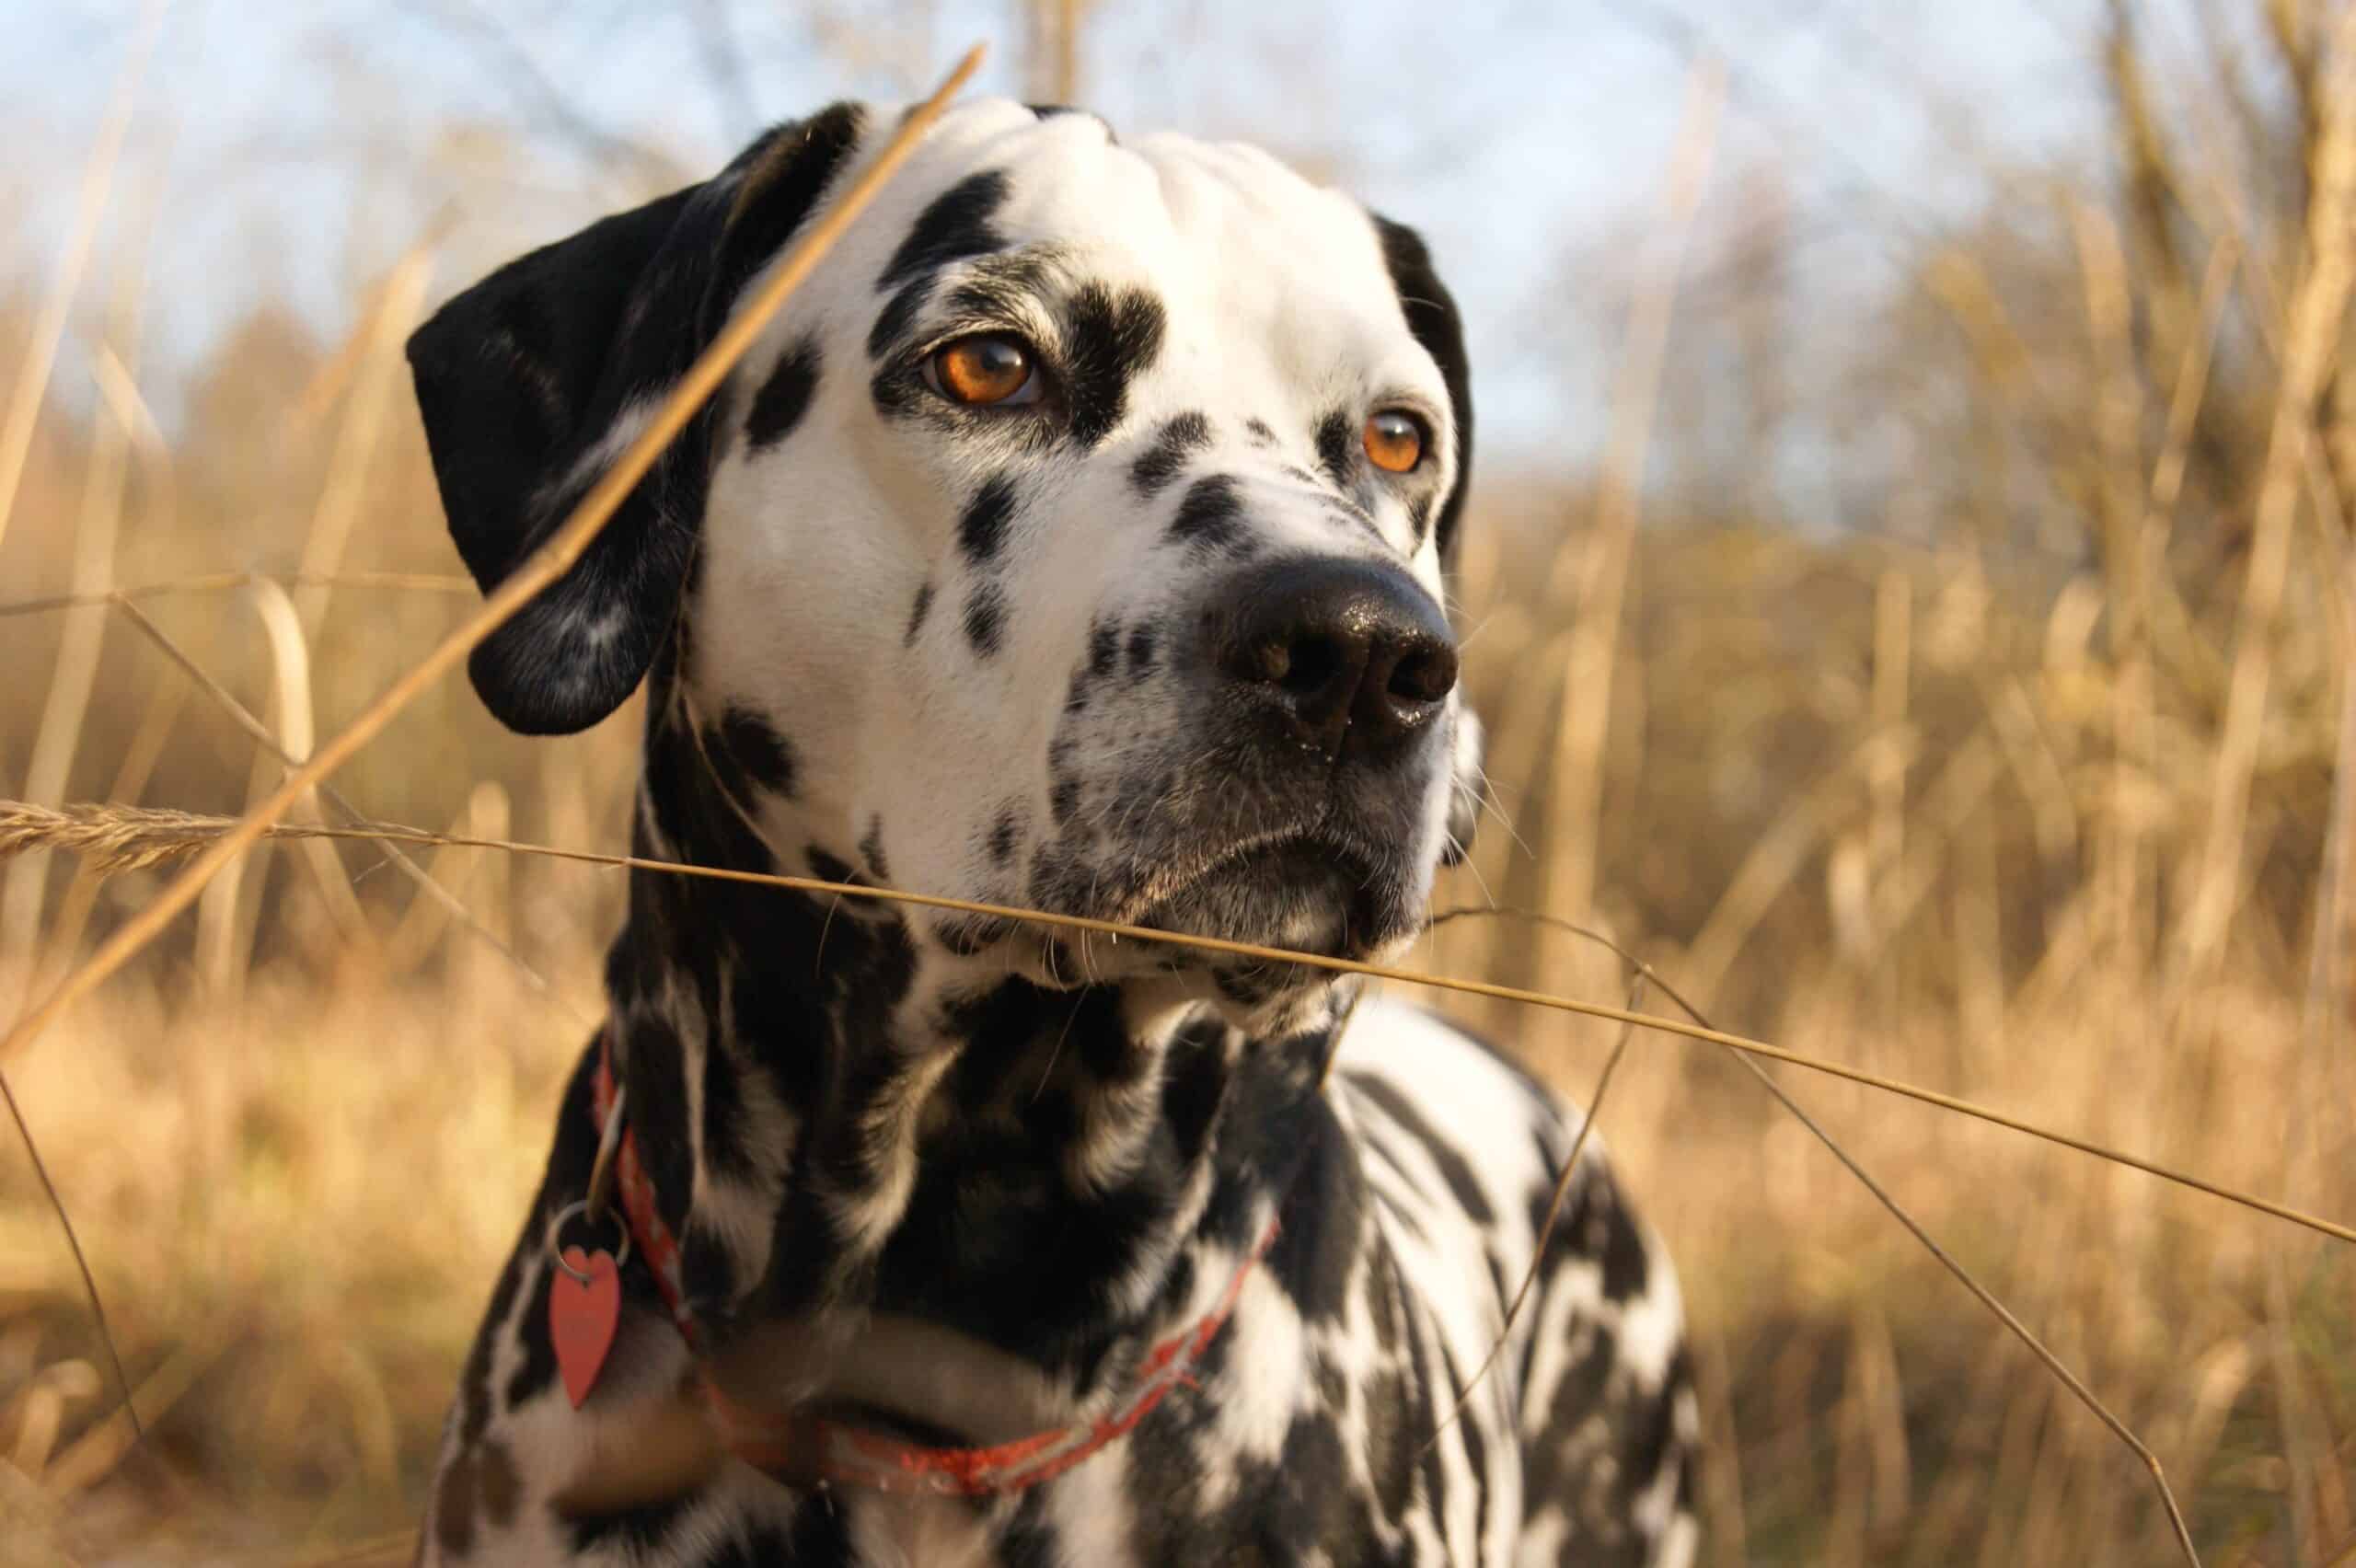 What are some of the pros of owning a Dalmatian?